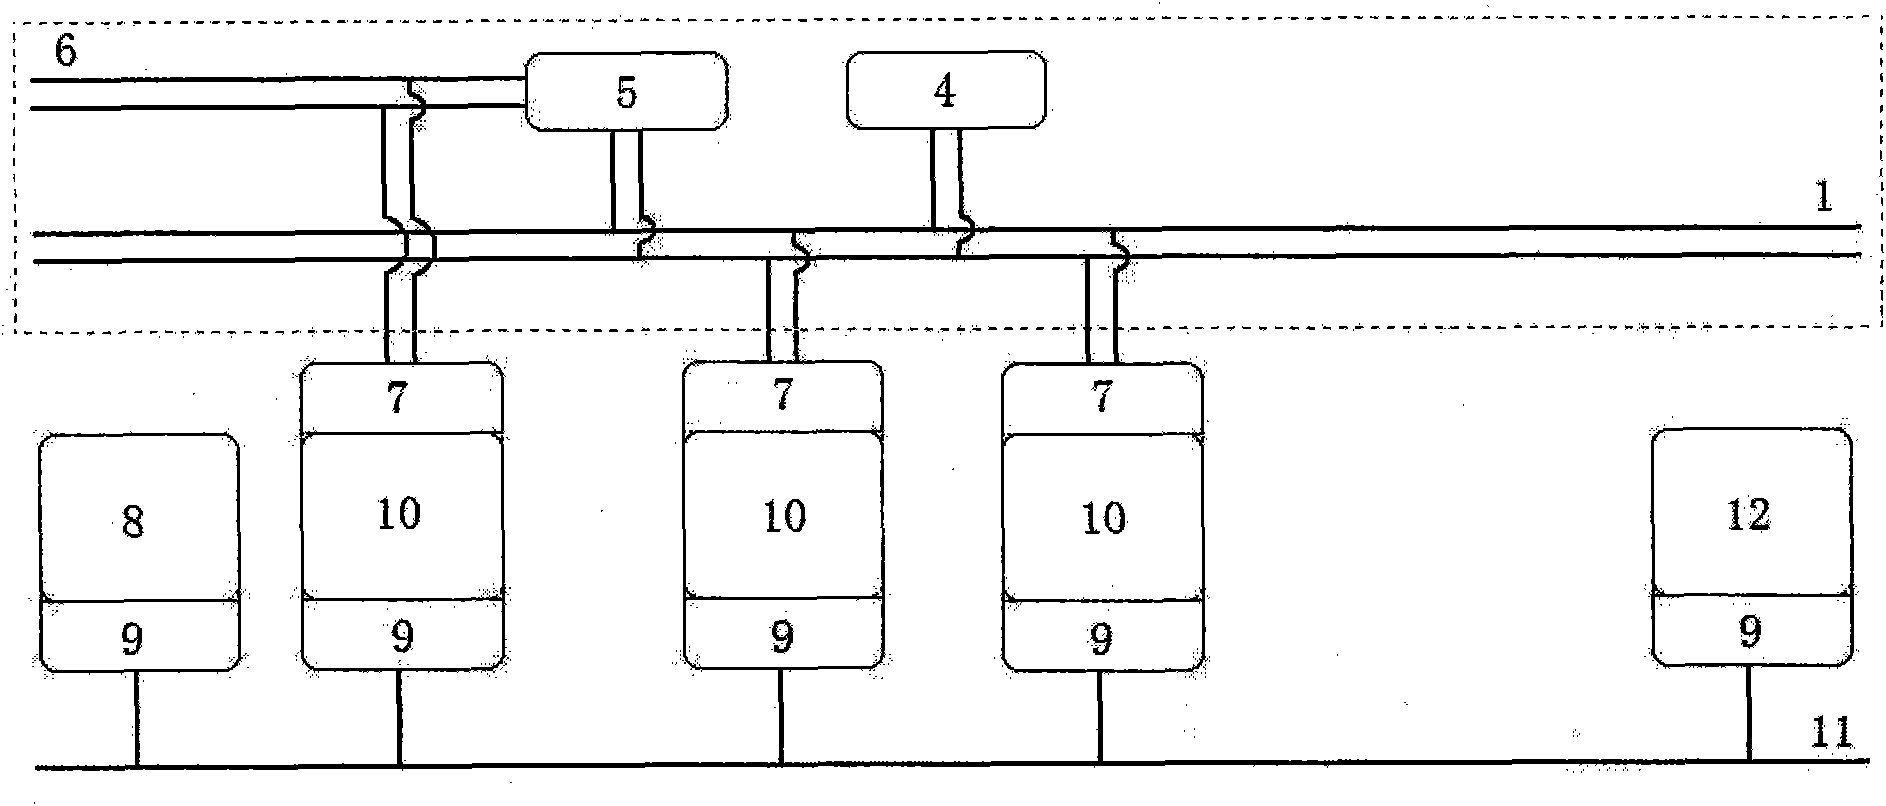 Automobile chassis integrated control-oriented vehicle-mounted CAN-BUS testing and evaluation system